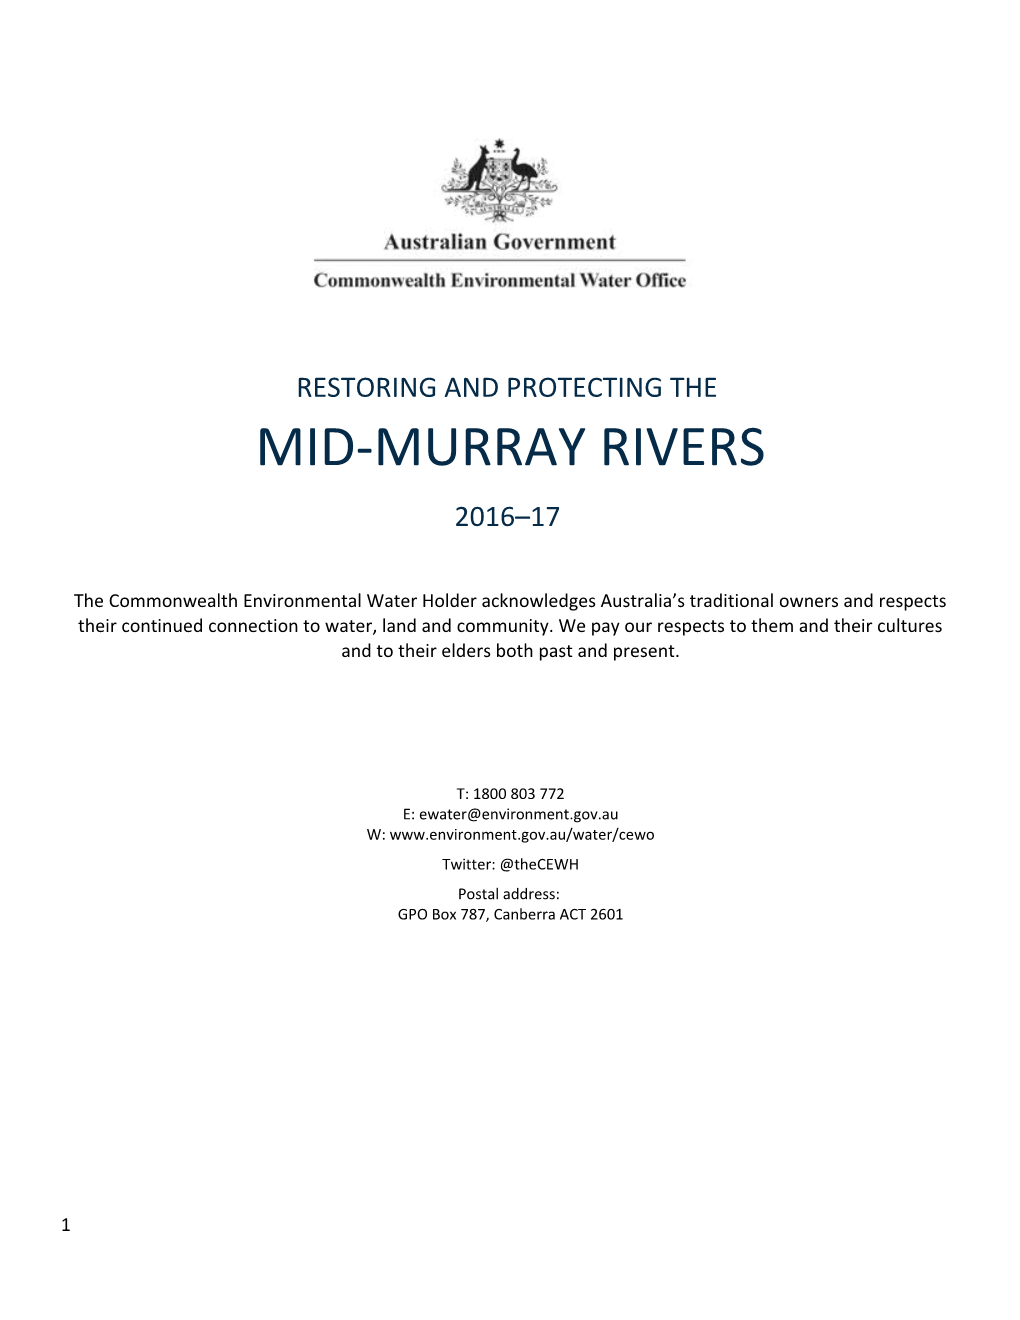 Restoring and Protecting the Mid-Murray Rivers 2016-17